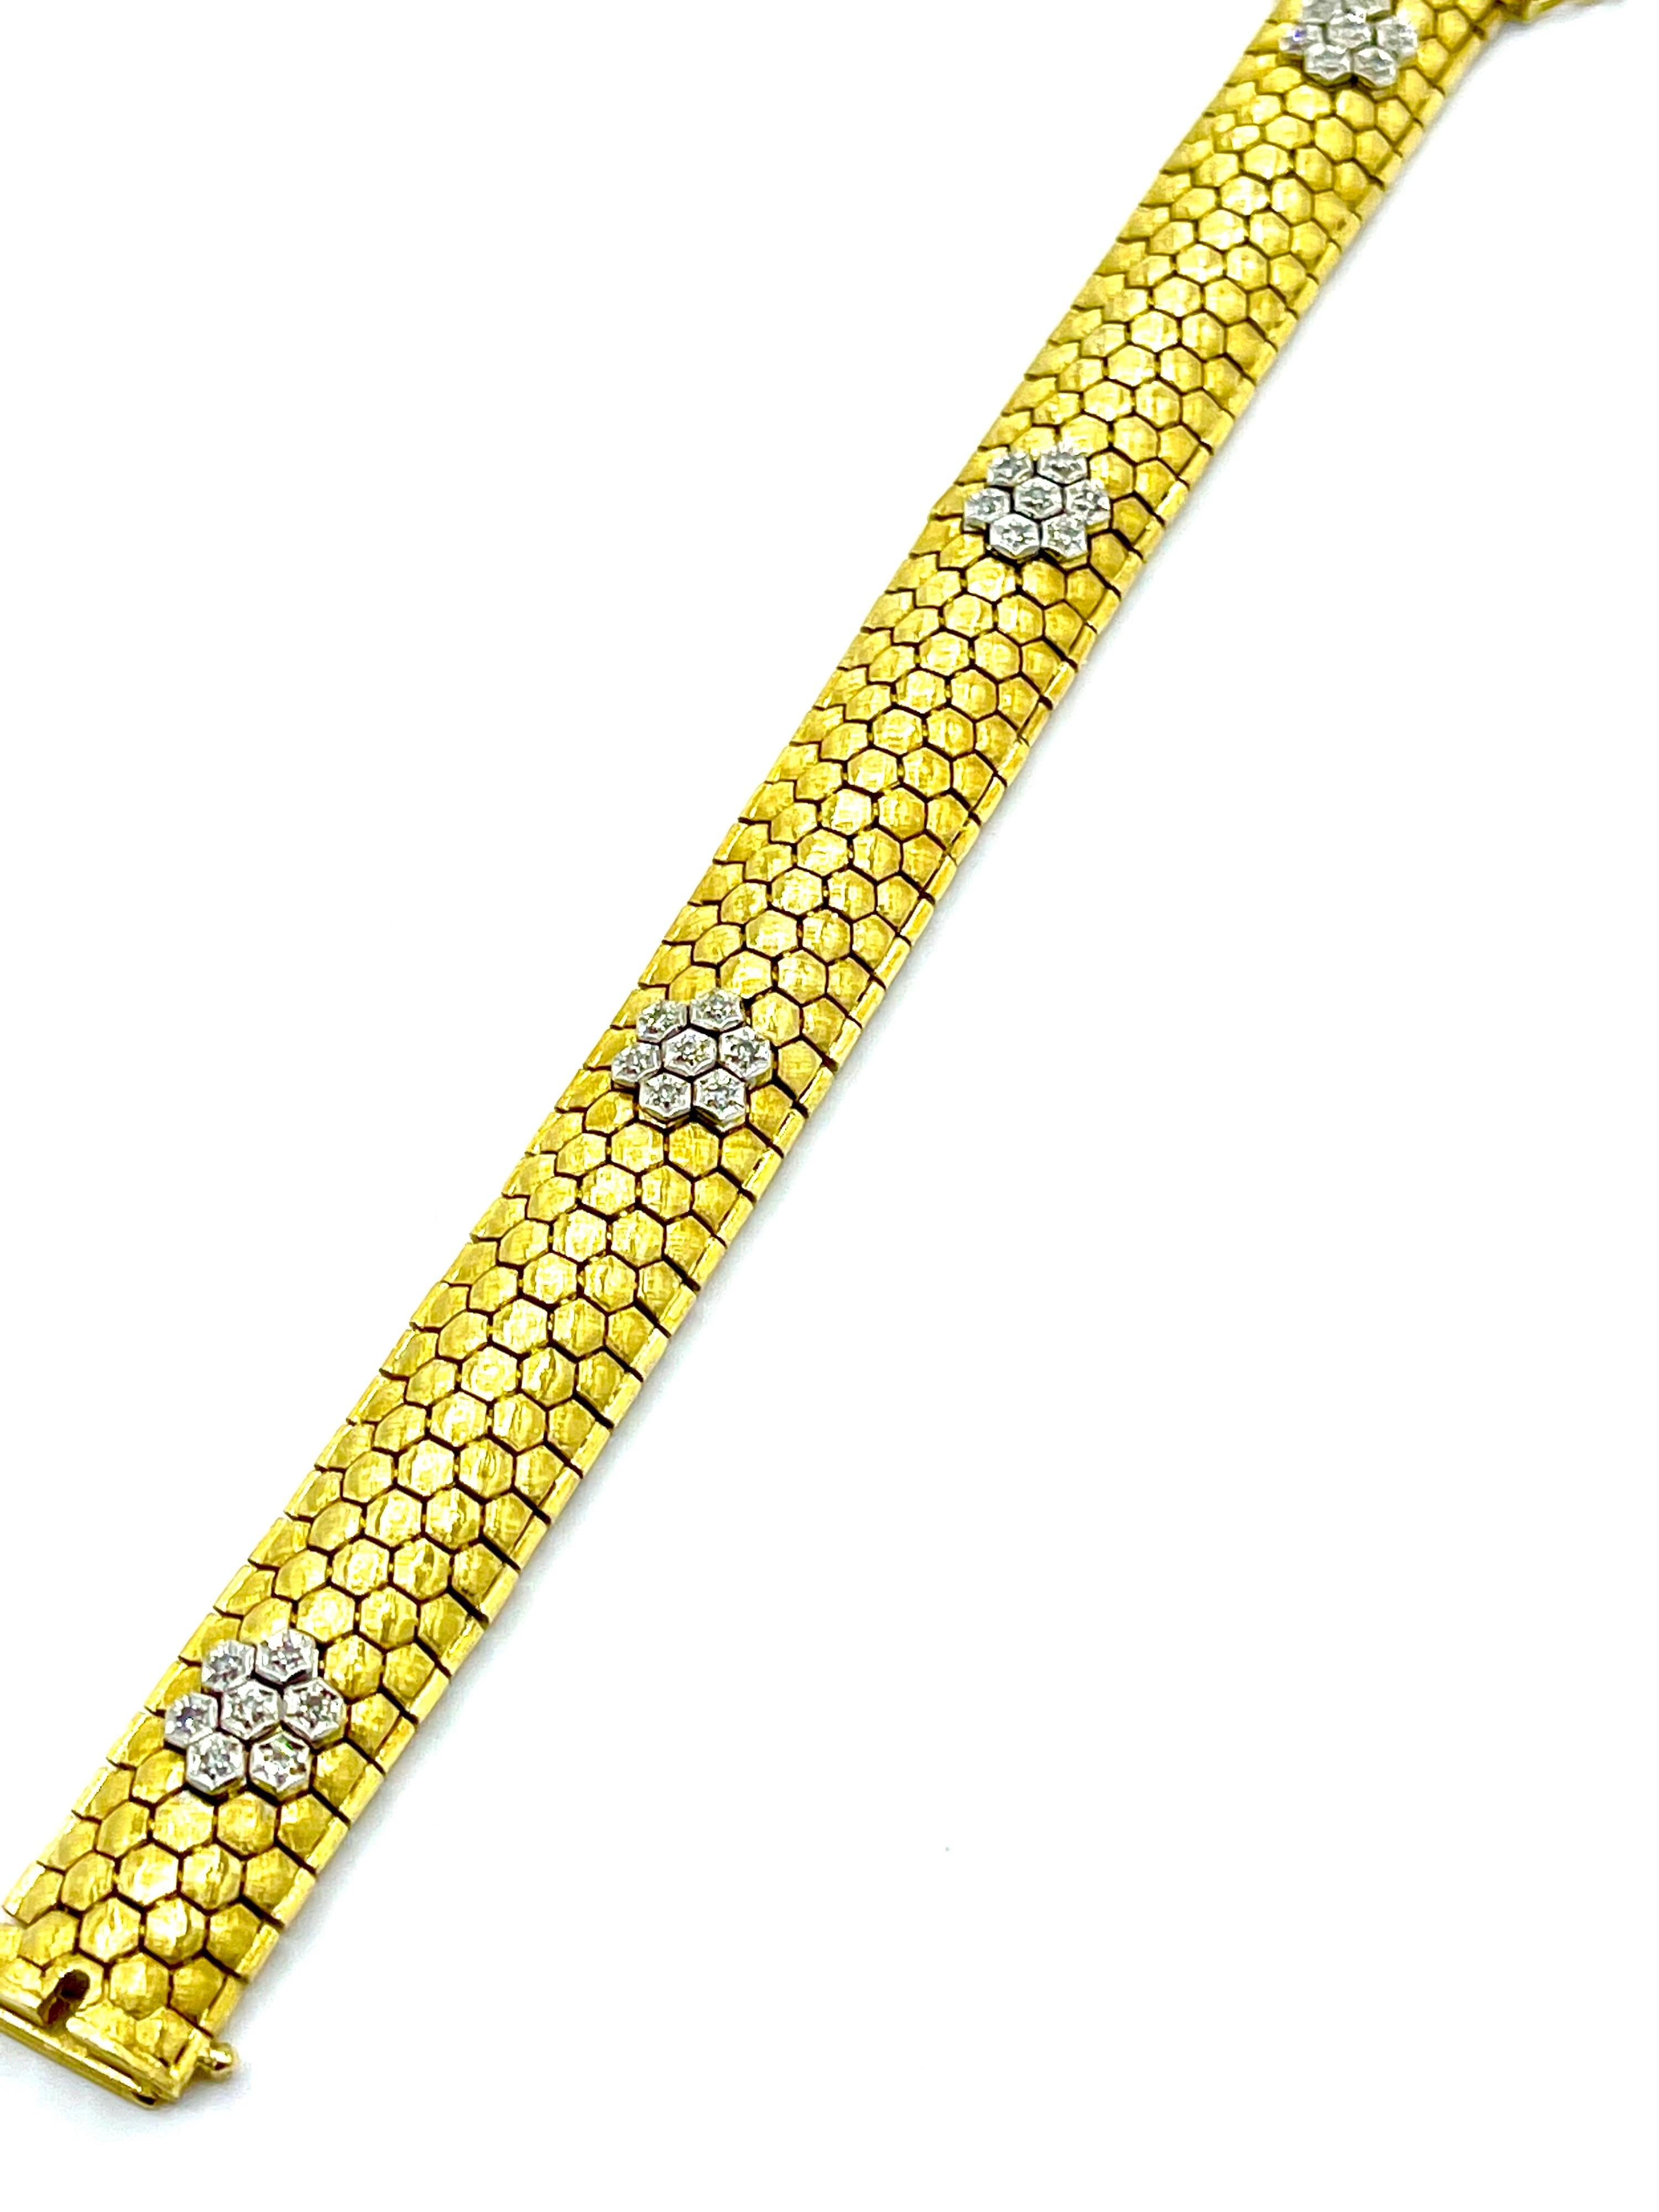 A simple and elegant bracelet in 18K yellow and white gold.  The bracelet has four Diamond stations set in white gold containing 0.28 carats in round brilliant Diamonds.  The links of the bracelet are handcrafted in honeycomb form with a brushed